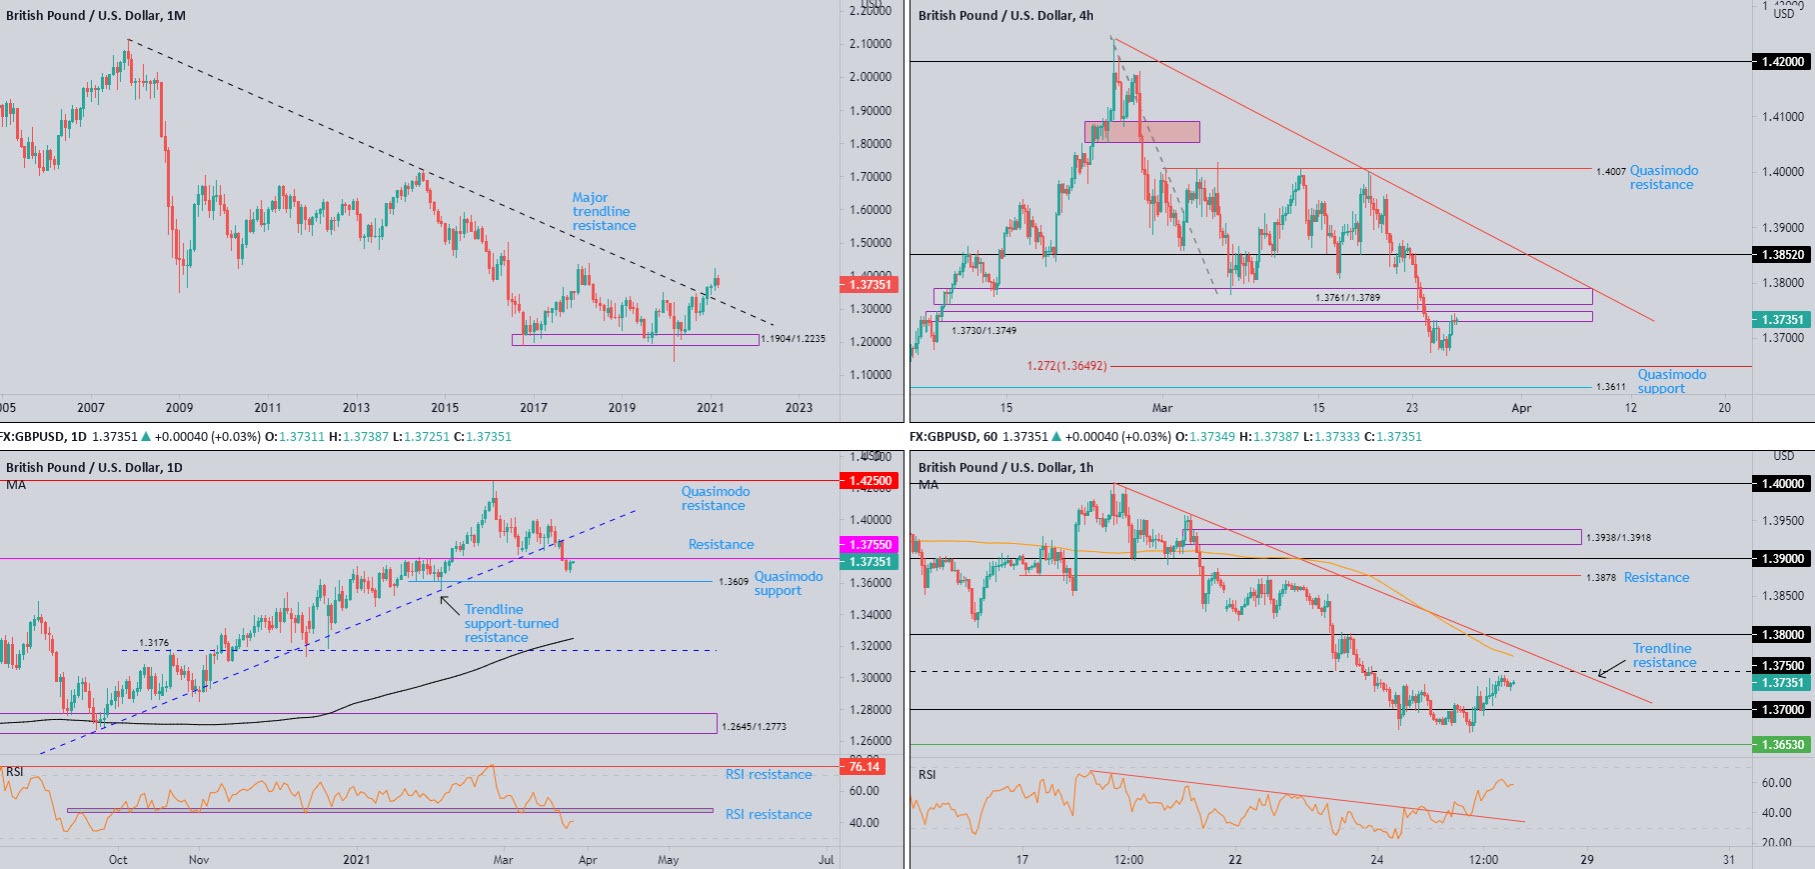 Dollar Index refreshes 2021 tops and dethrones 200Day SMA